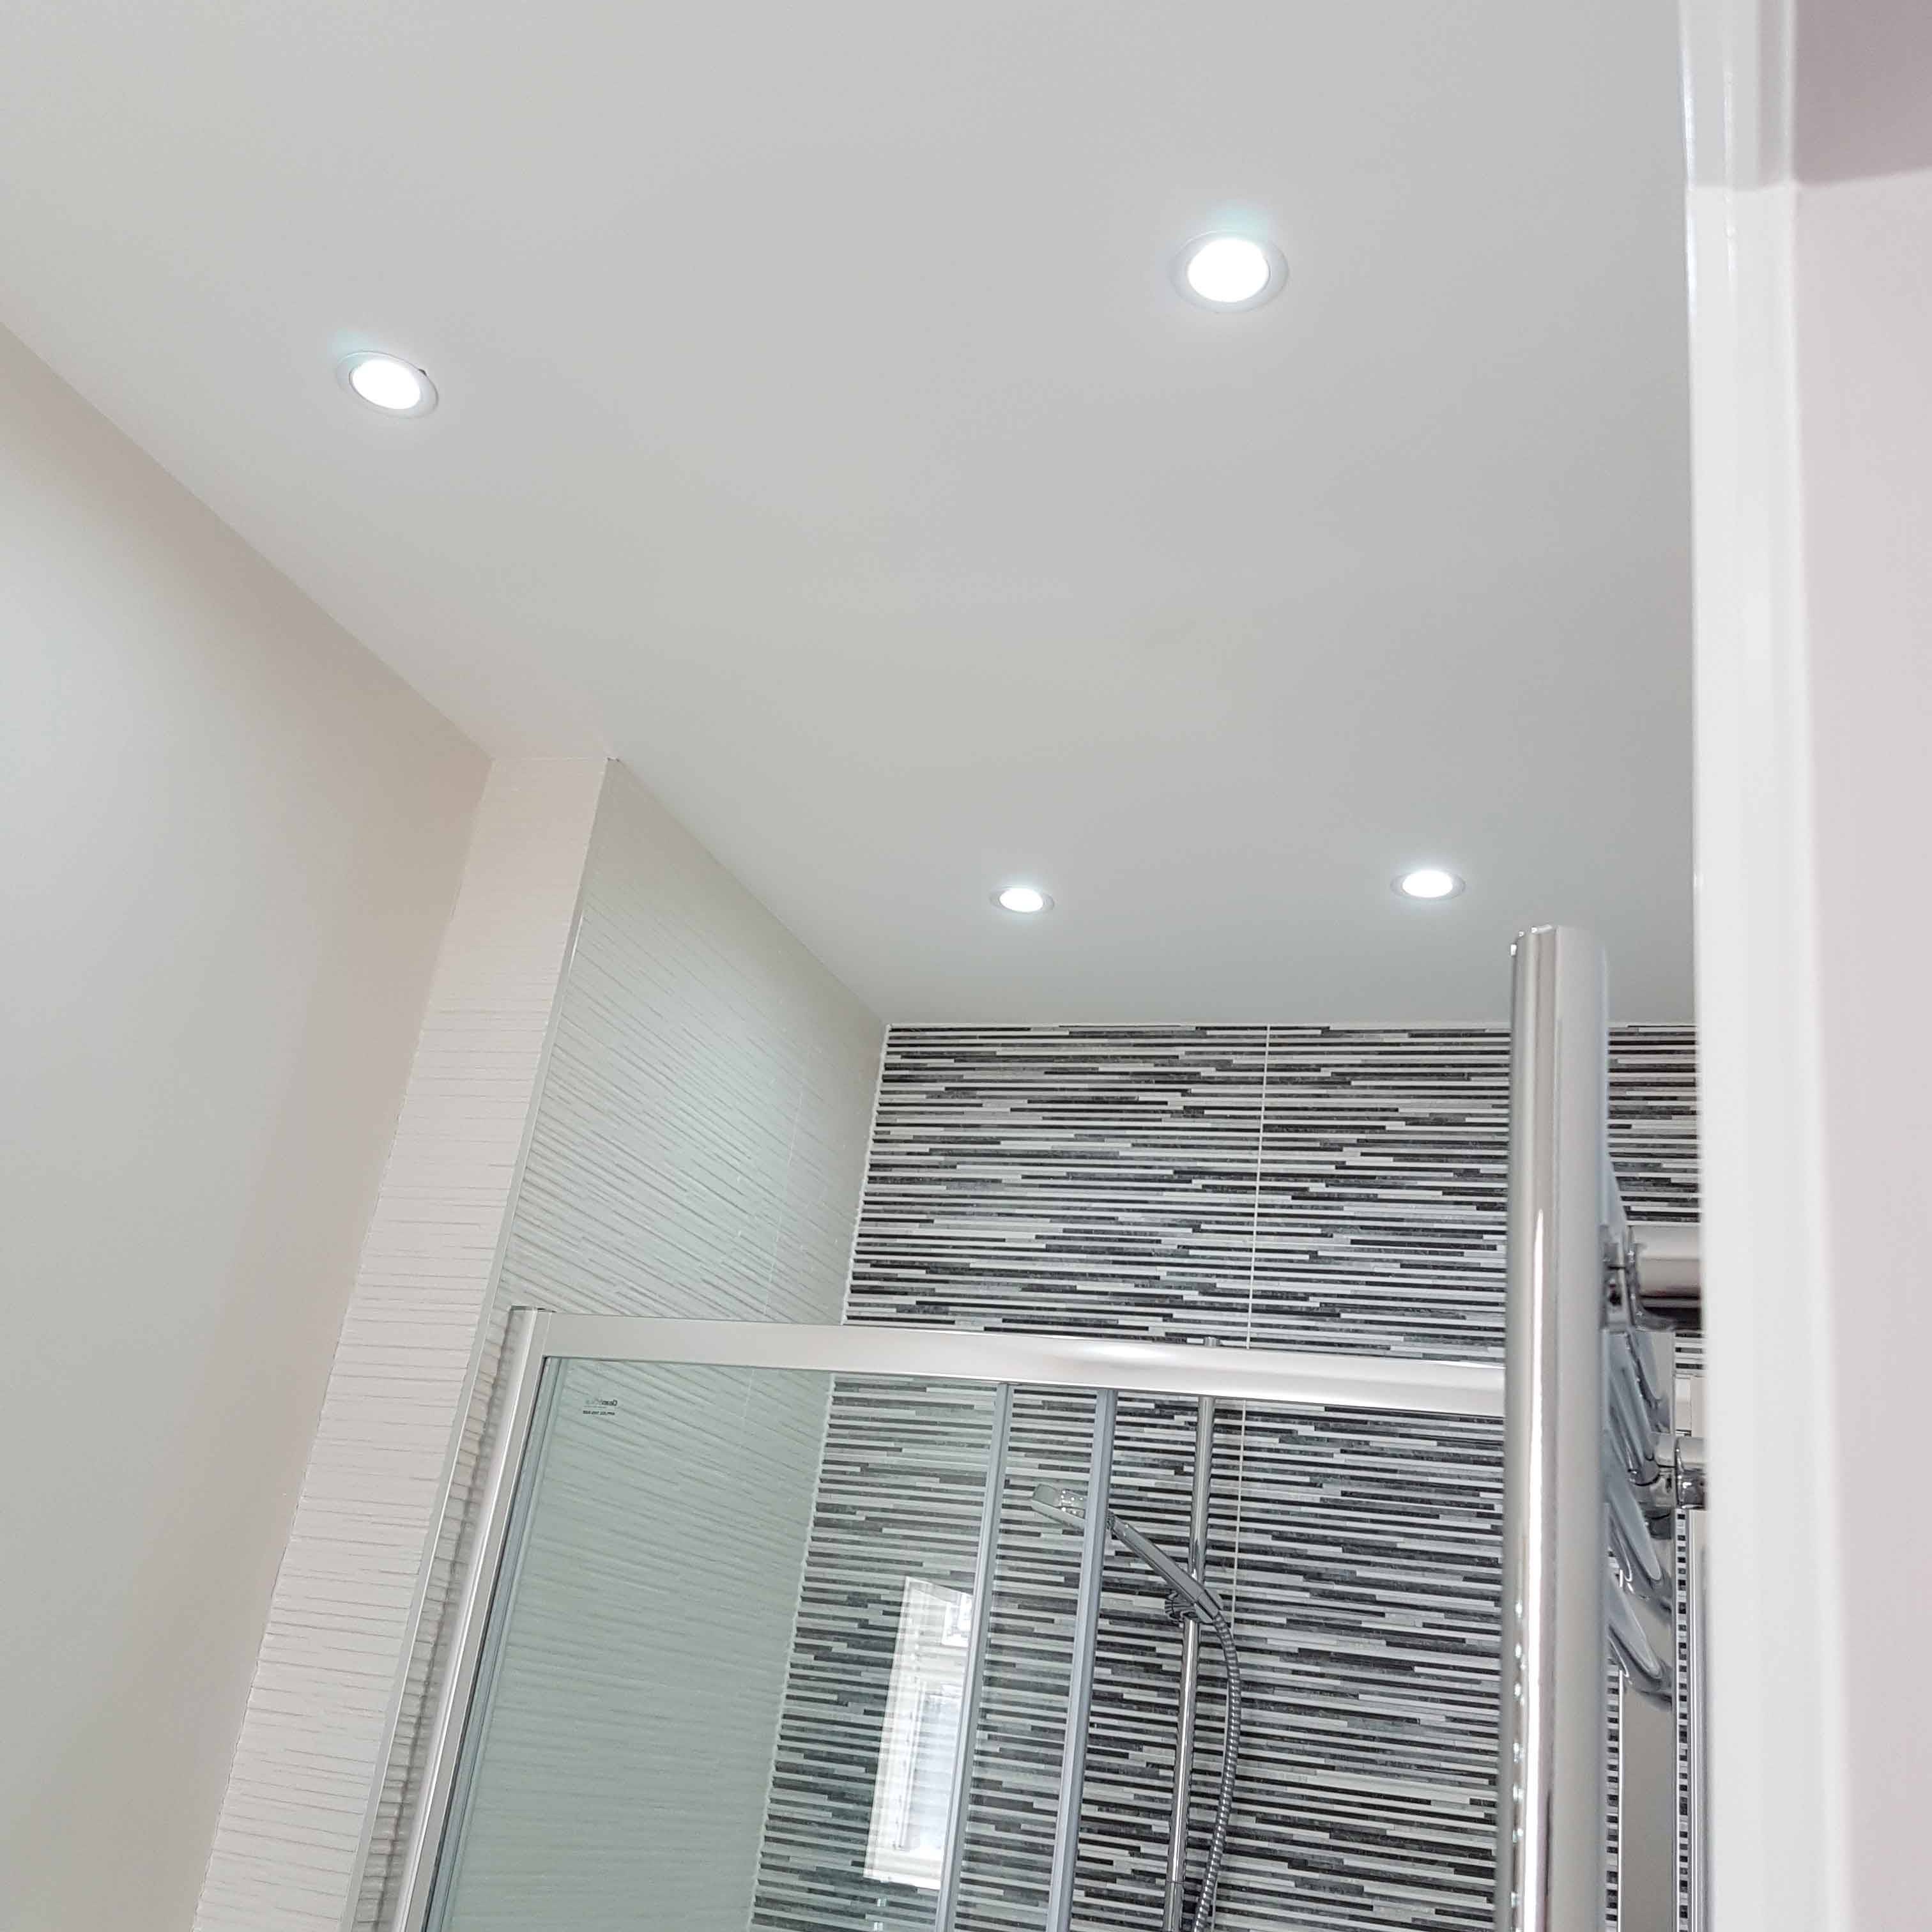 Cleverspark Electrical Installers and Electrians based in Bristol, Bath and the South West of England - An example of interior spotlight bathroom light fixtures/fittings